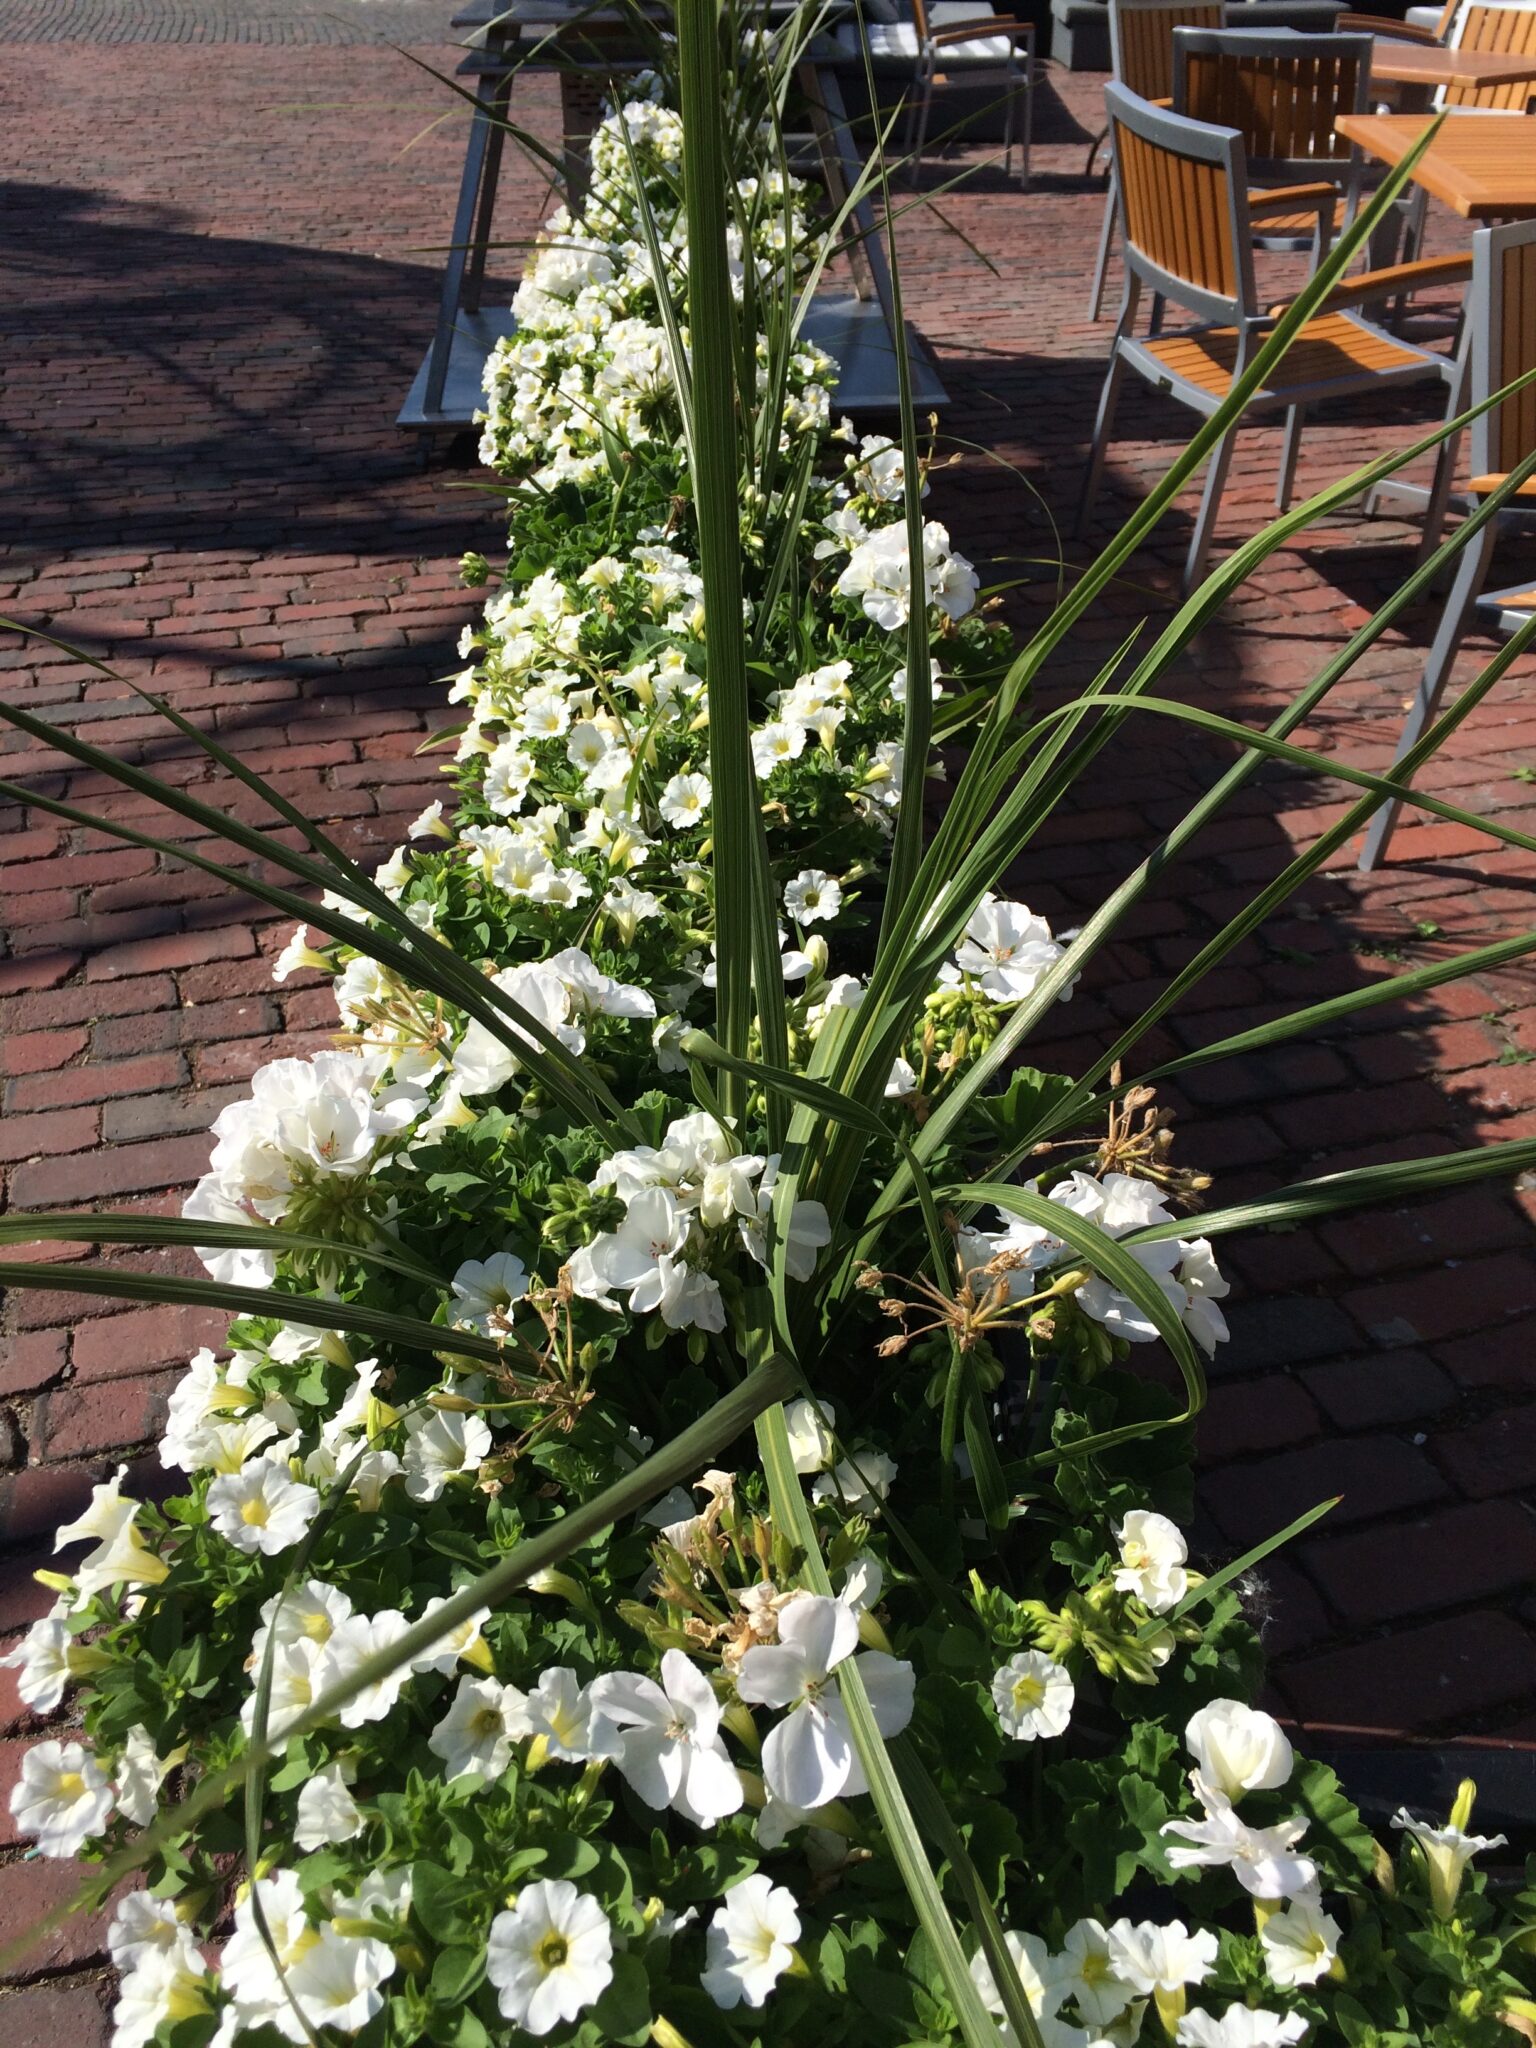 White flowering plants including petunias and geraniums with green spikes in a planter shaped like a hedge.